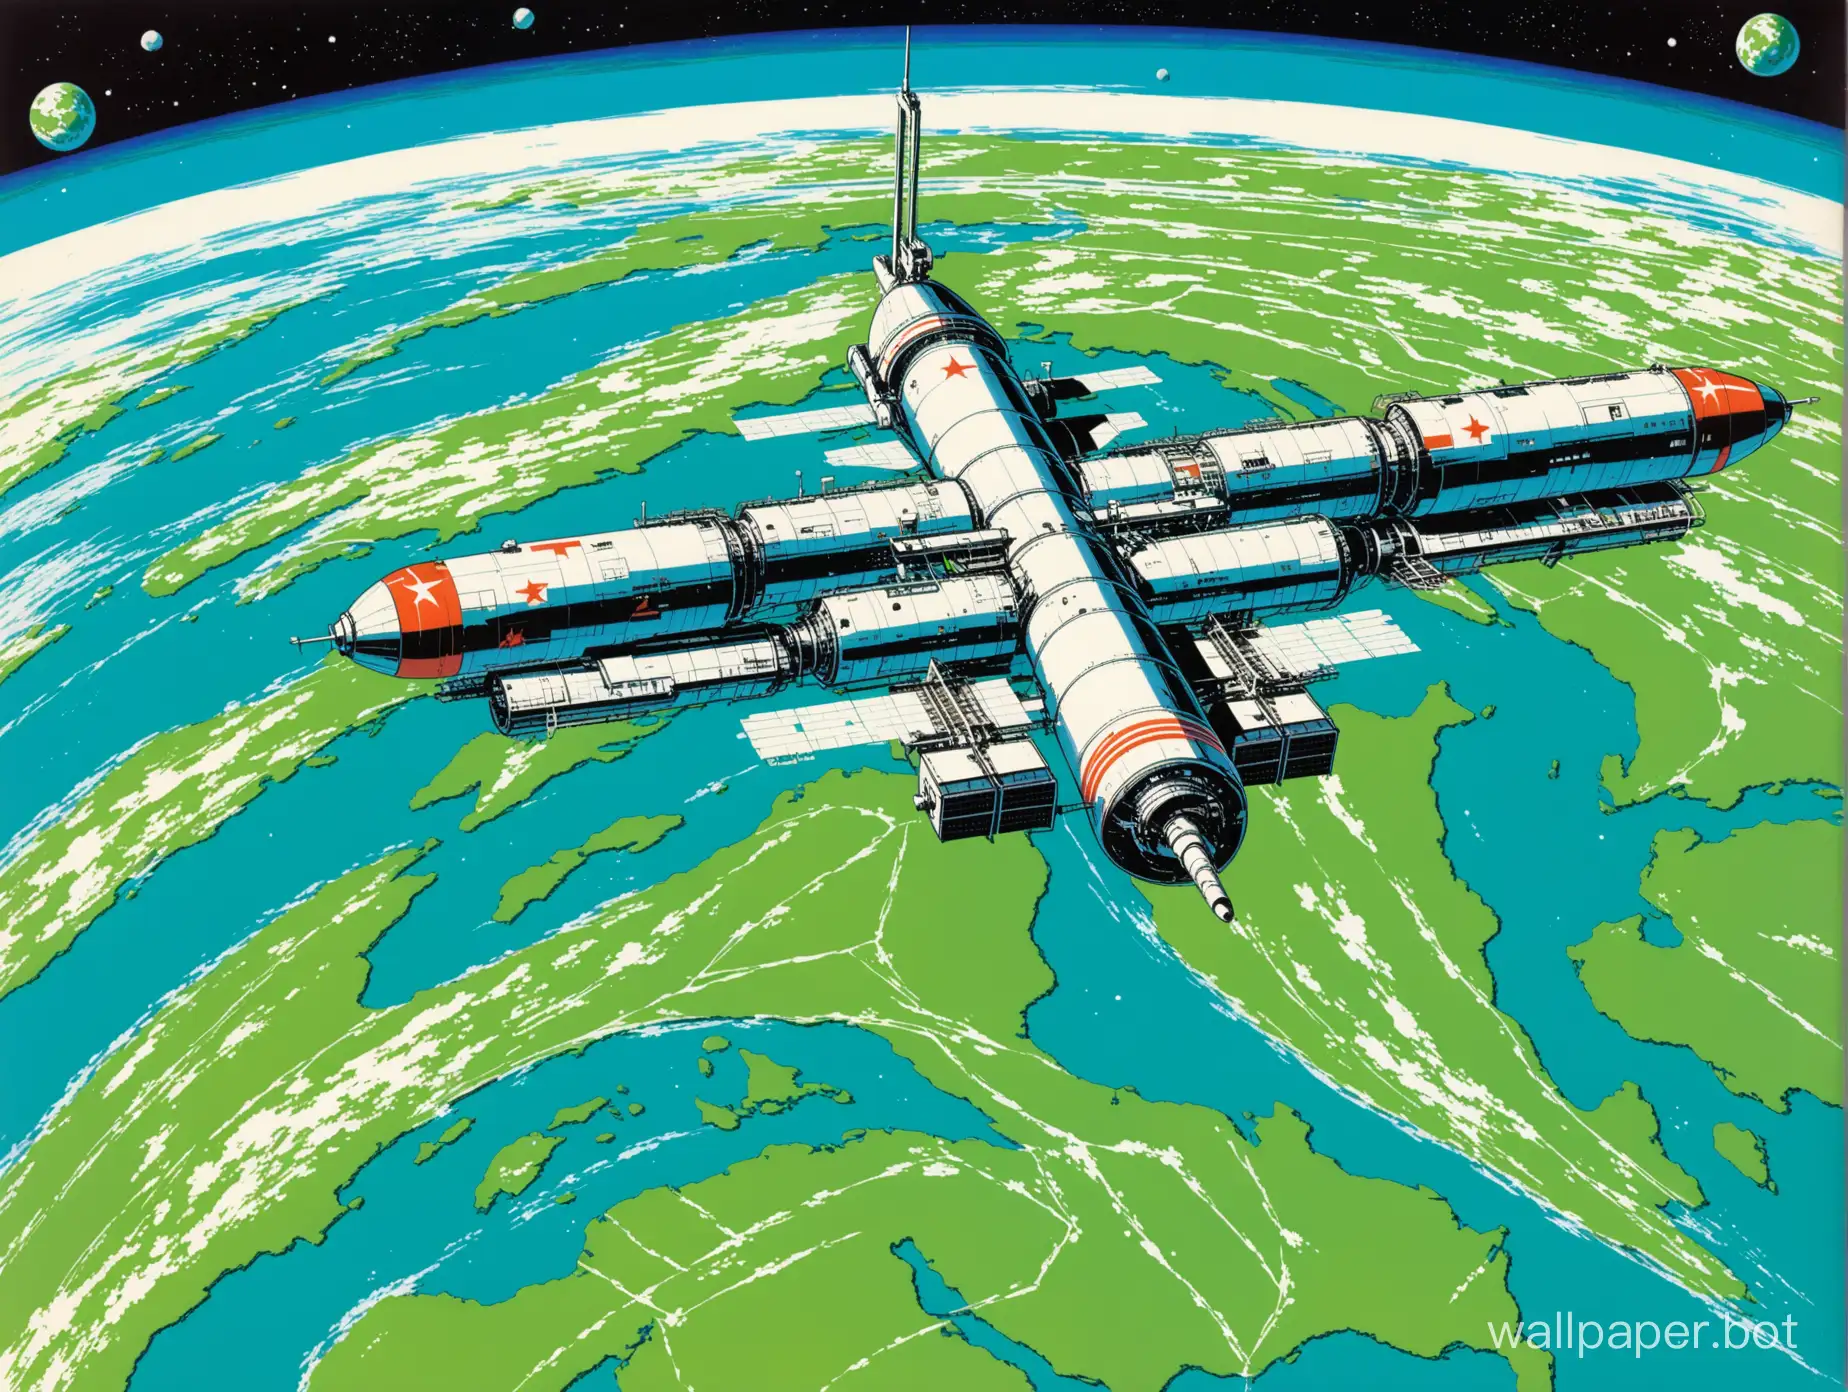 Soviet MIR space stations above the green Earth 80-s